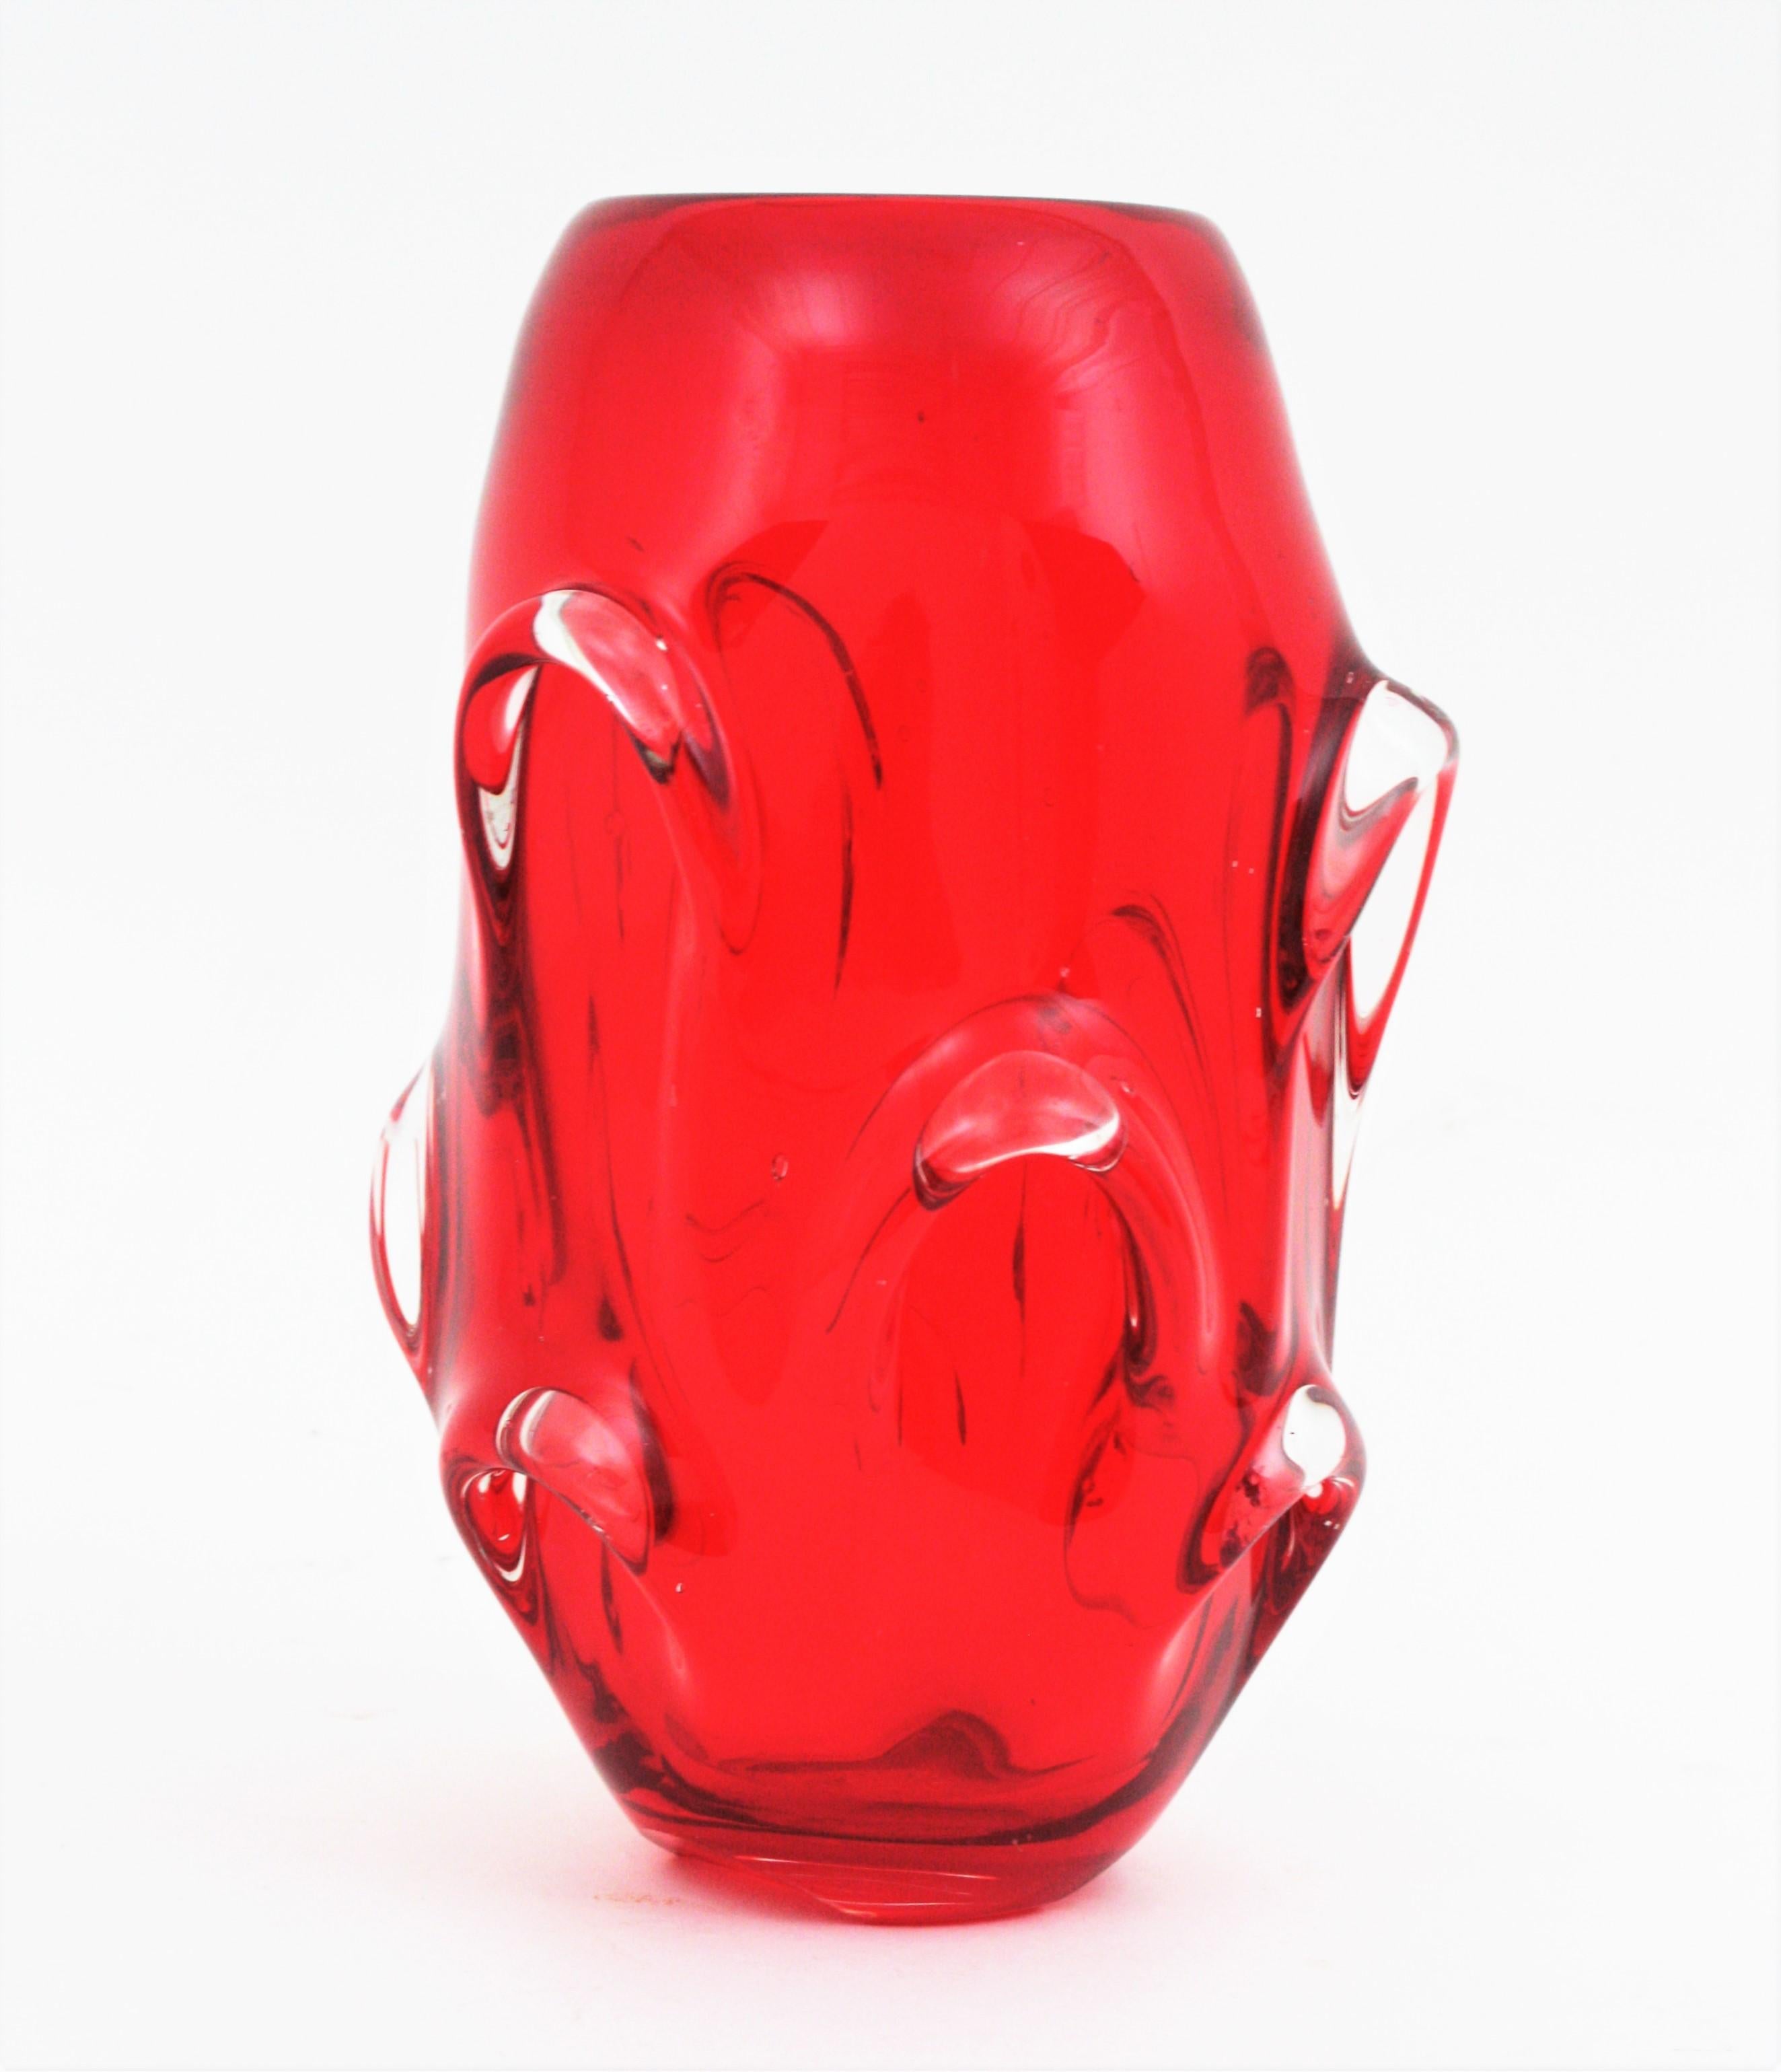 Hand-Crafted Archimede Seguso Murano Sommerso Red Art Glass Vase, 1960s For Sale